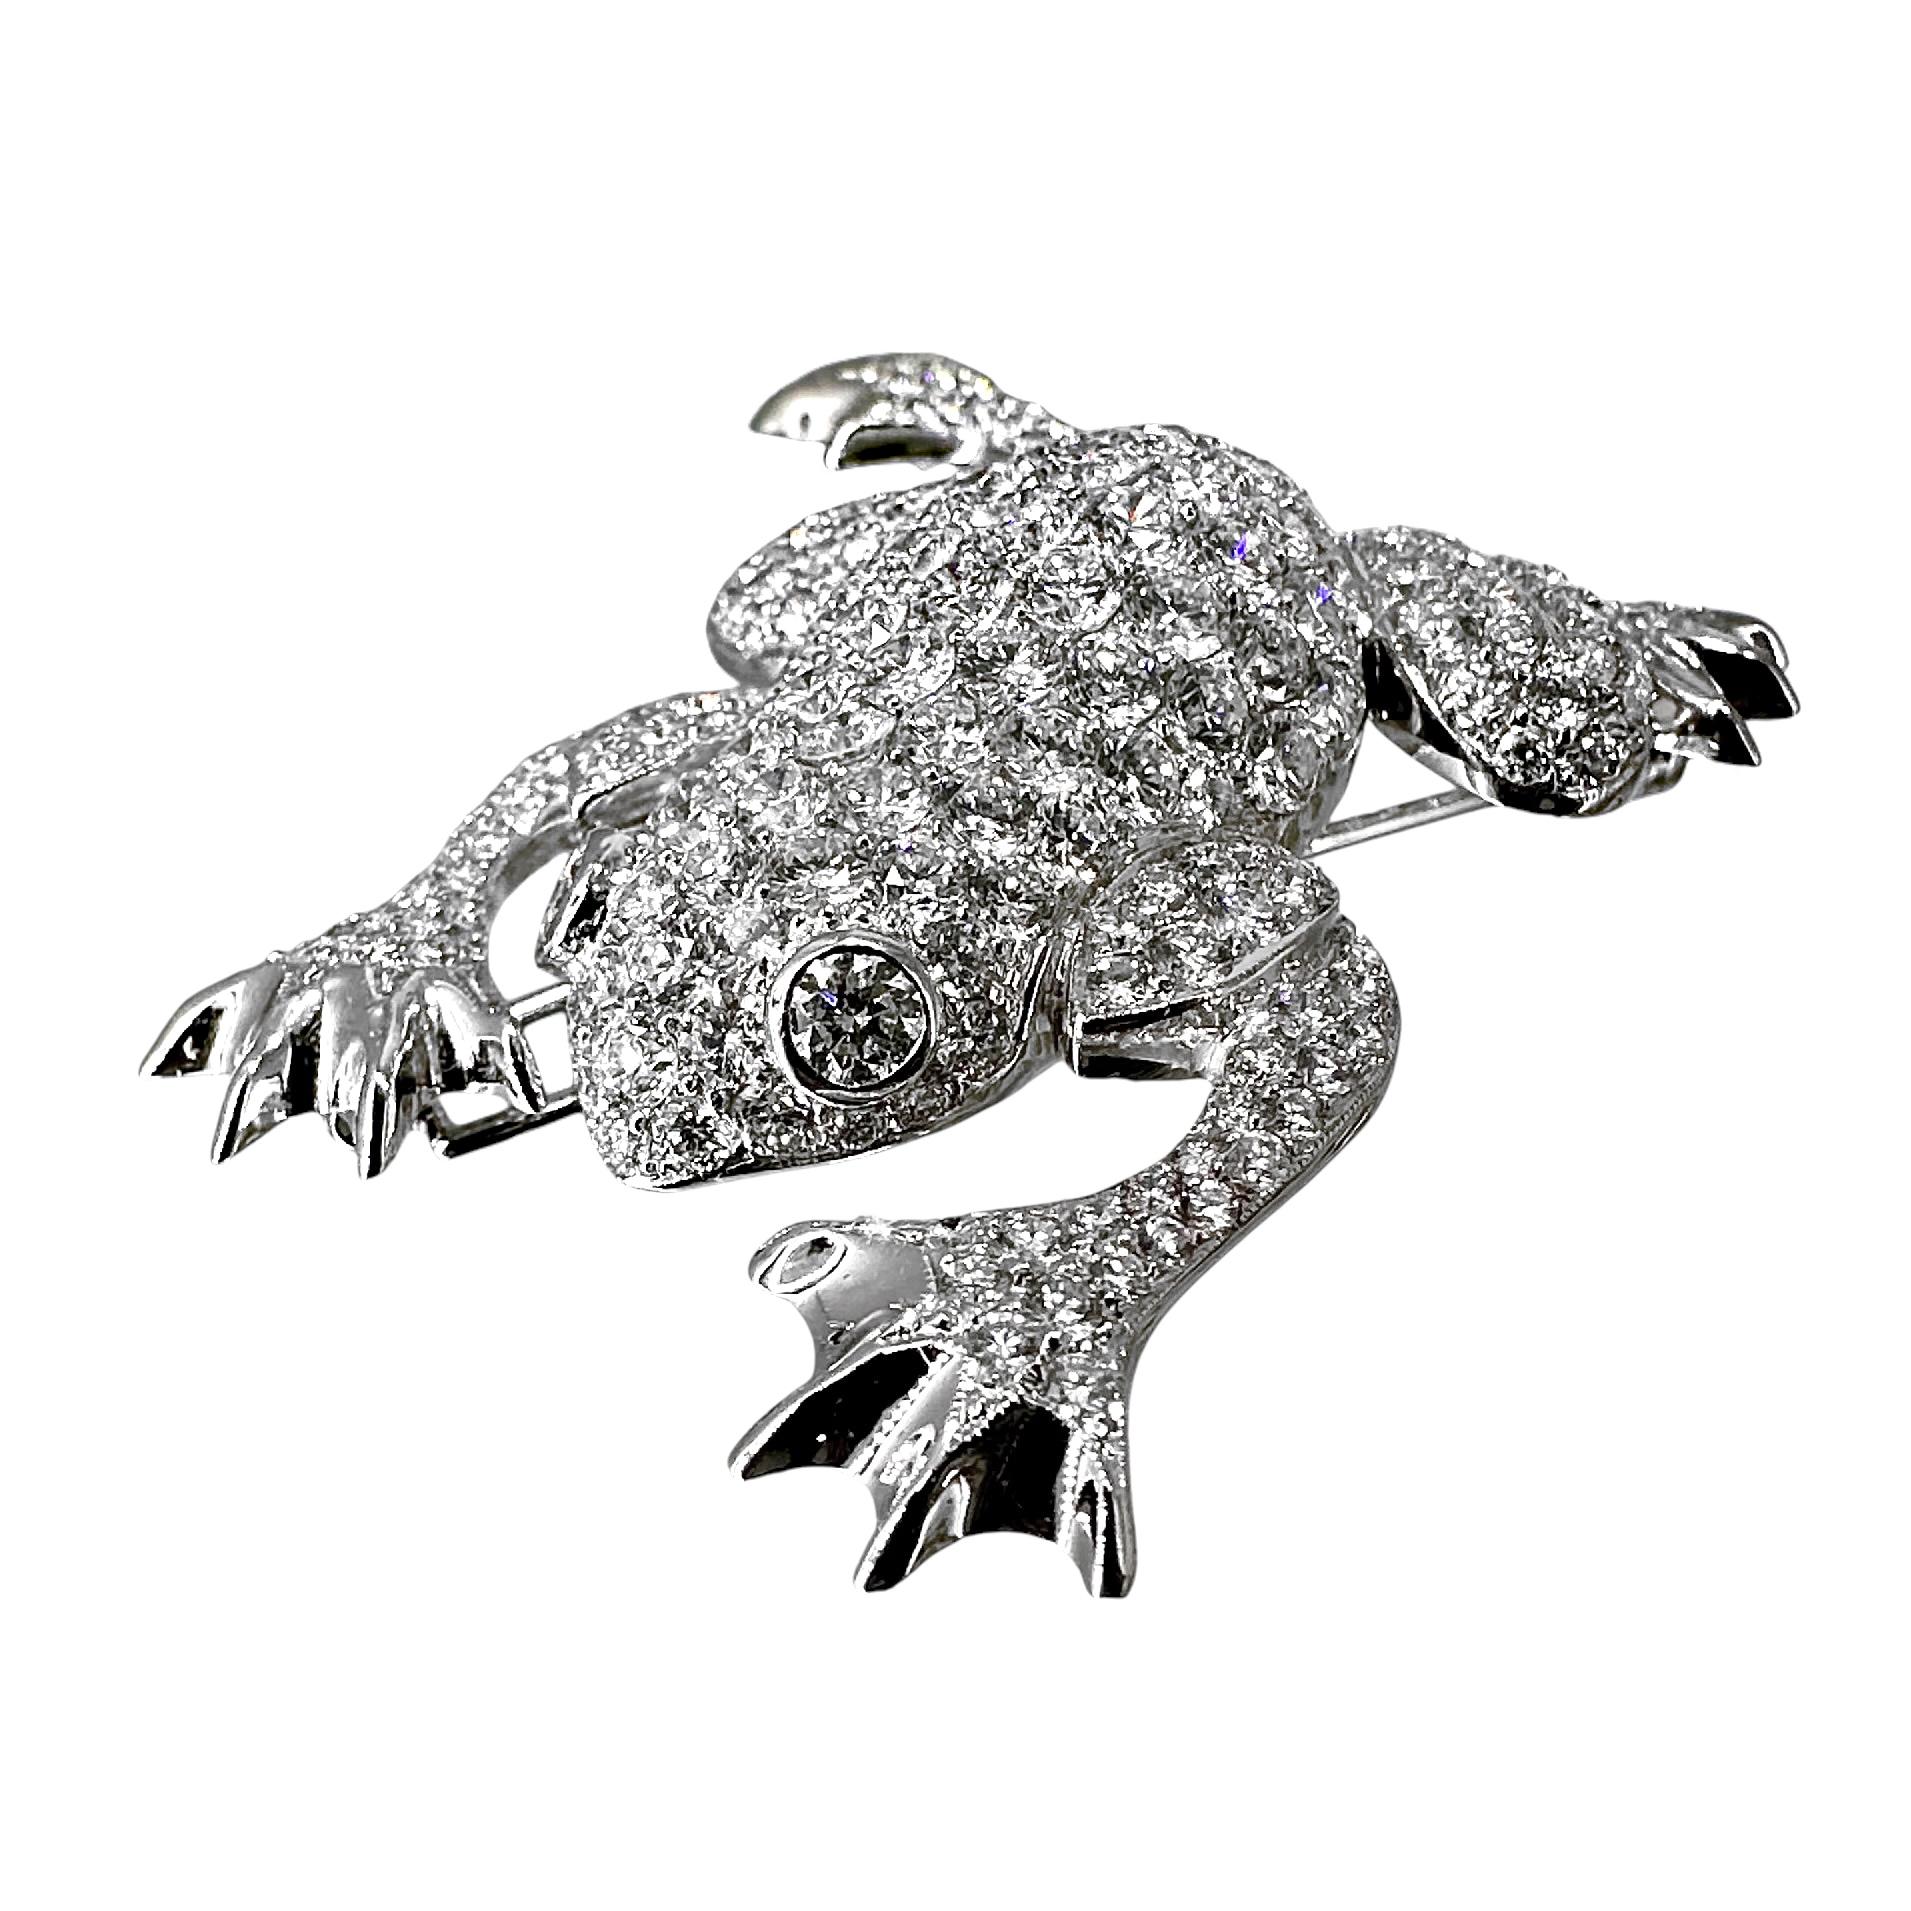 Brilliant Cut Glittering 18k White Gold Diamond Encrusted Leaping Frog Brooch with 9.50cts For Sale